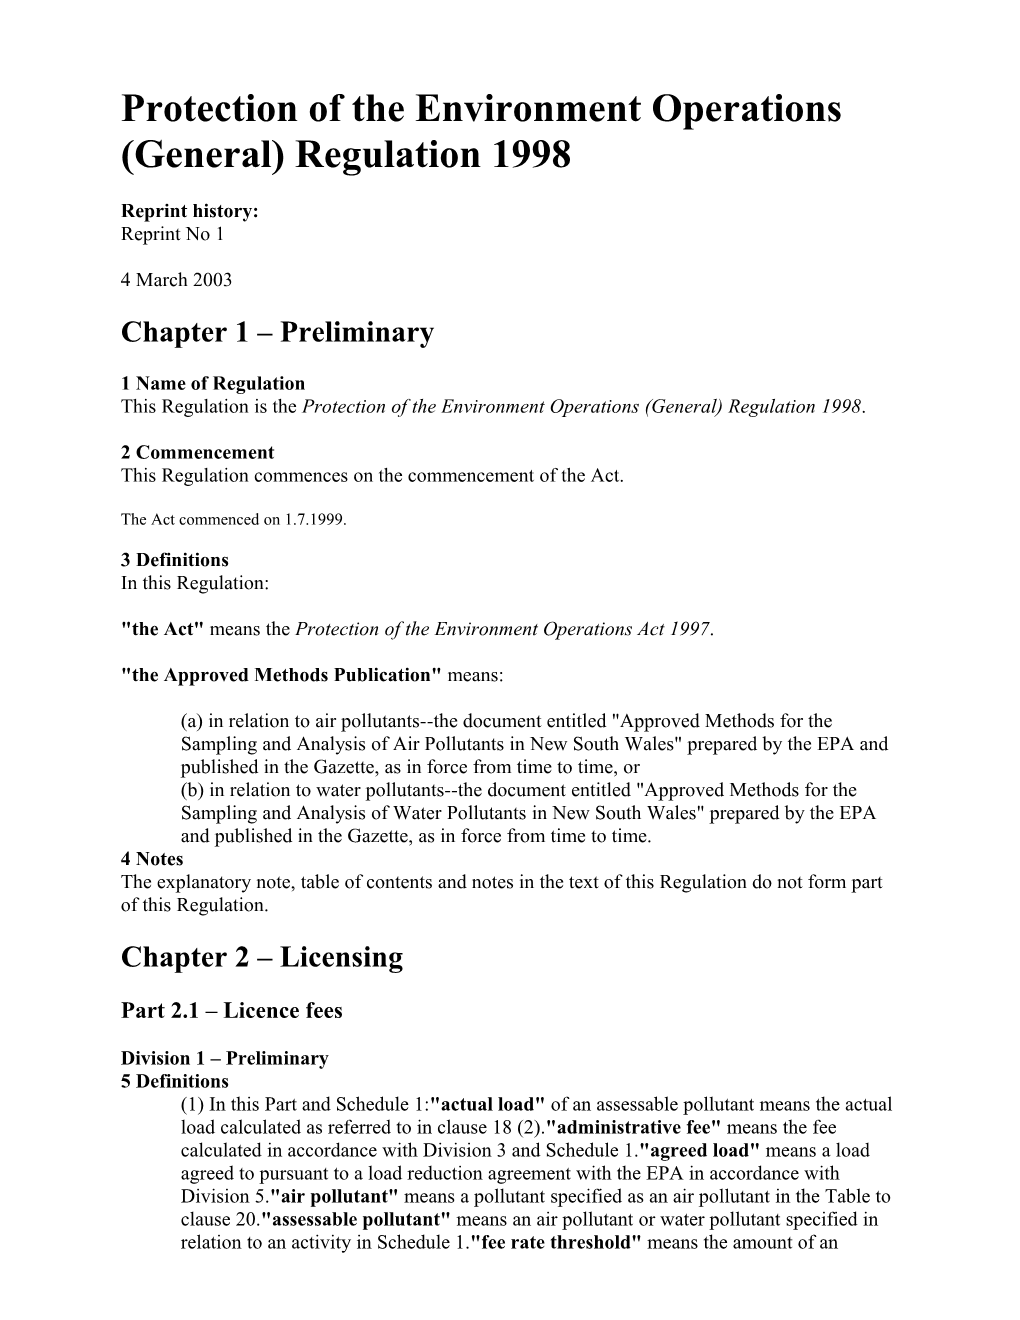 Protection of the Environment Operations (General) Regulation 1998